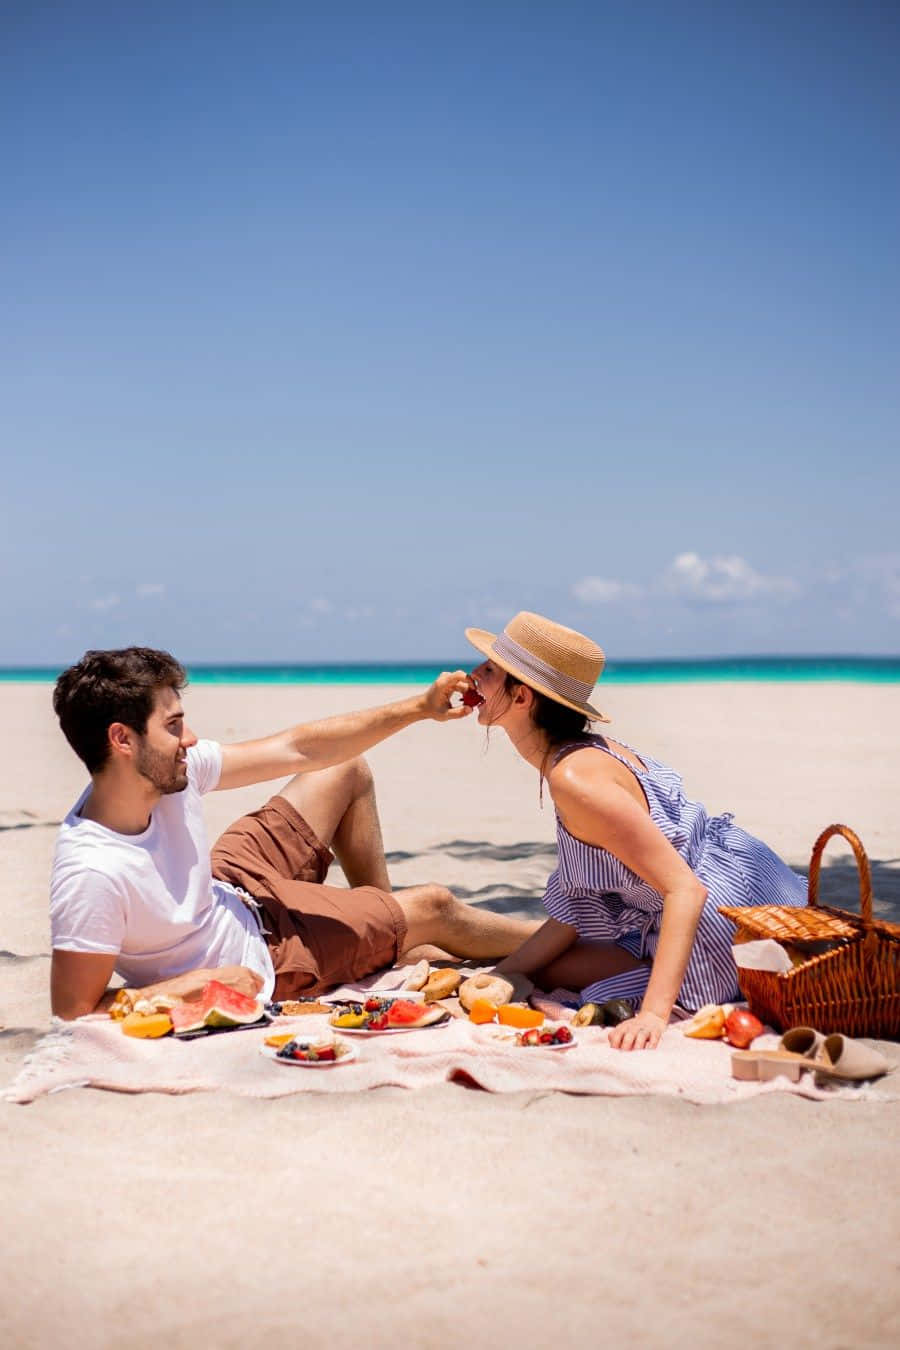 A Loving Moment: Couple Enjoying a Relaxing Picnic on the Beach Wallpaper